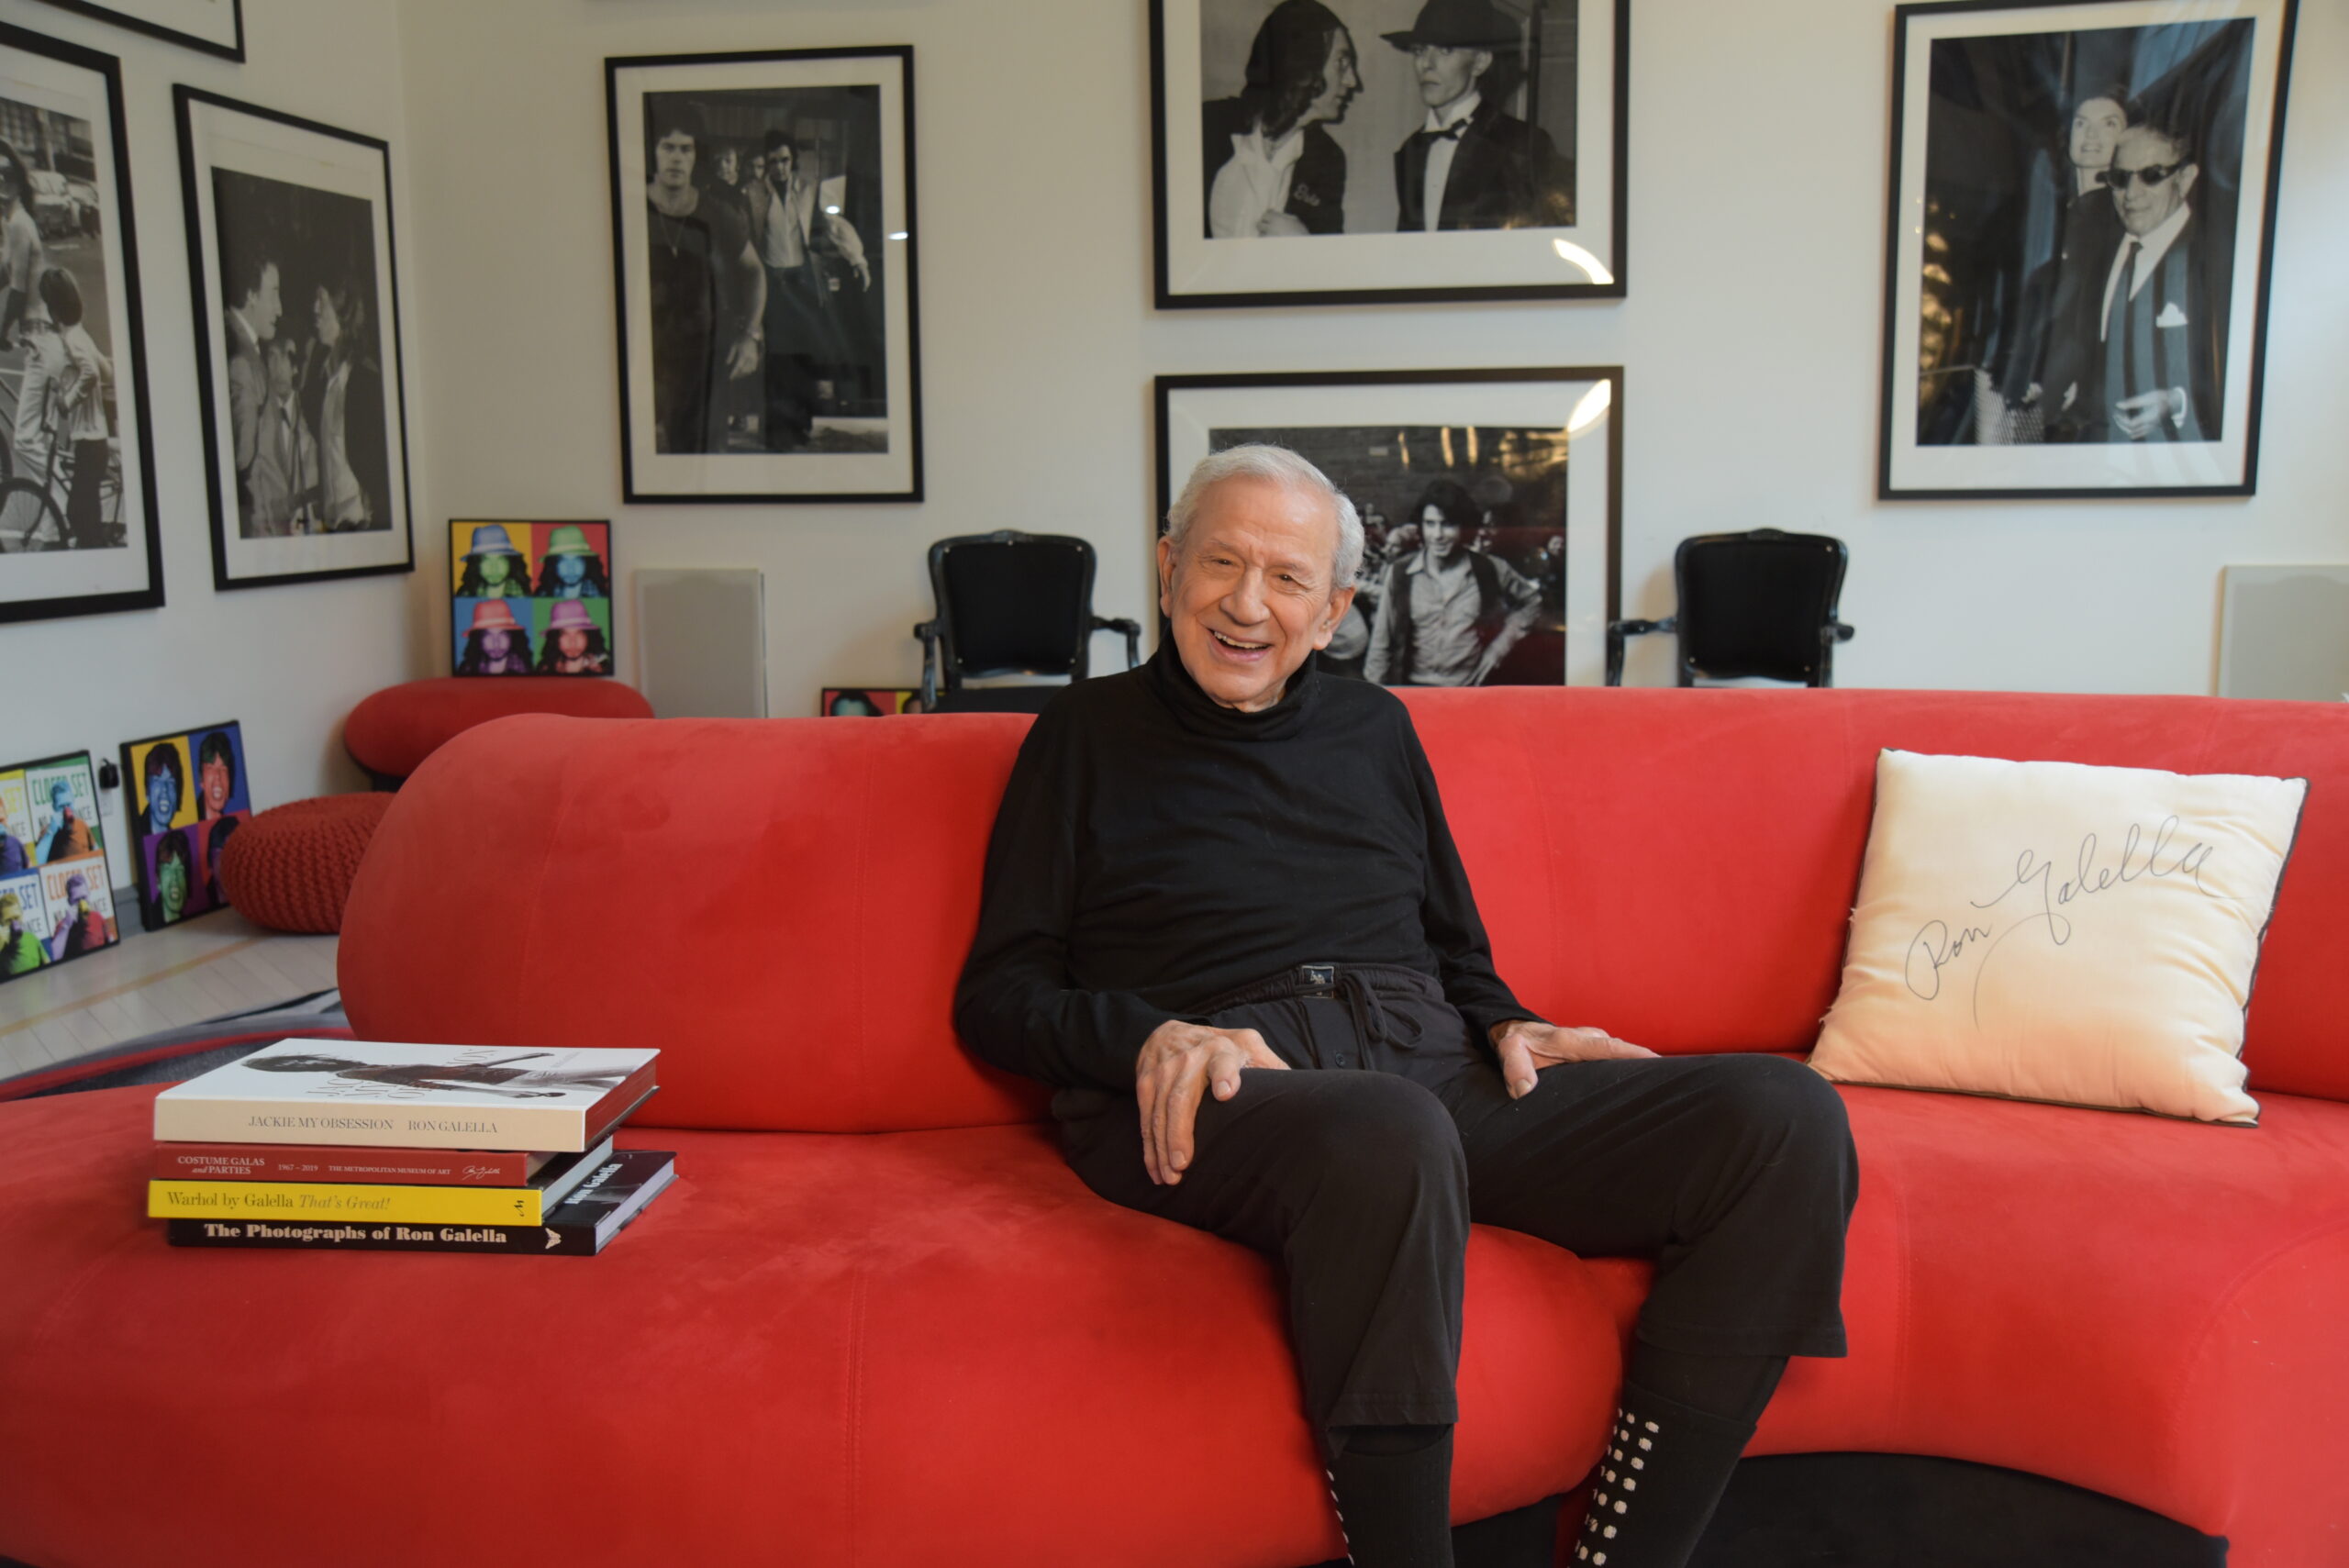 Ron Galella, age 90, at his New Jersey home, July 2021.<br/>
Photo credit to the right: © Geoffrey Croft